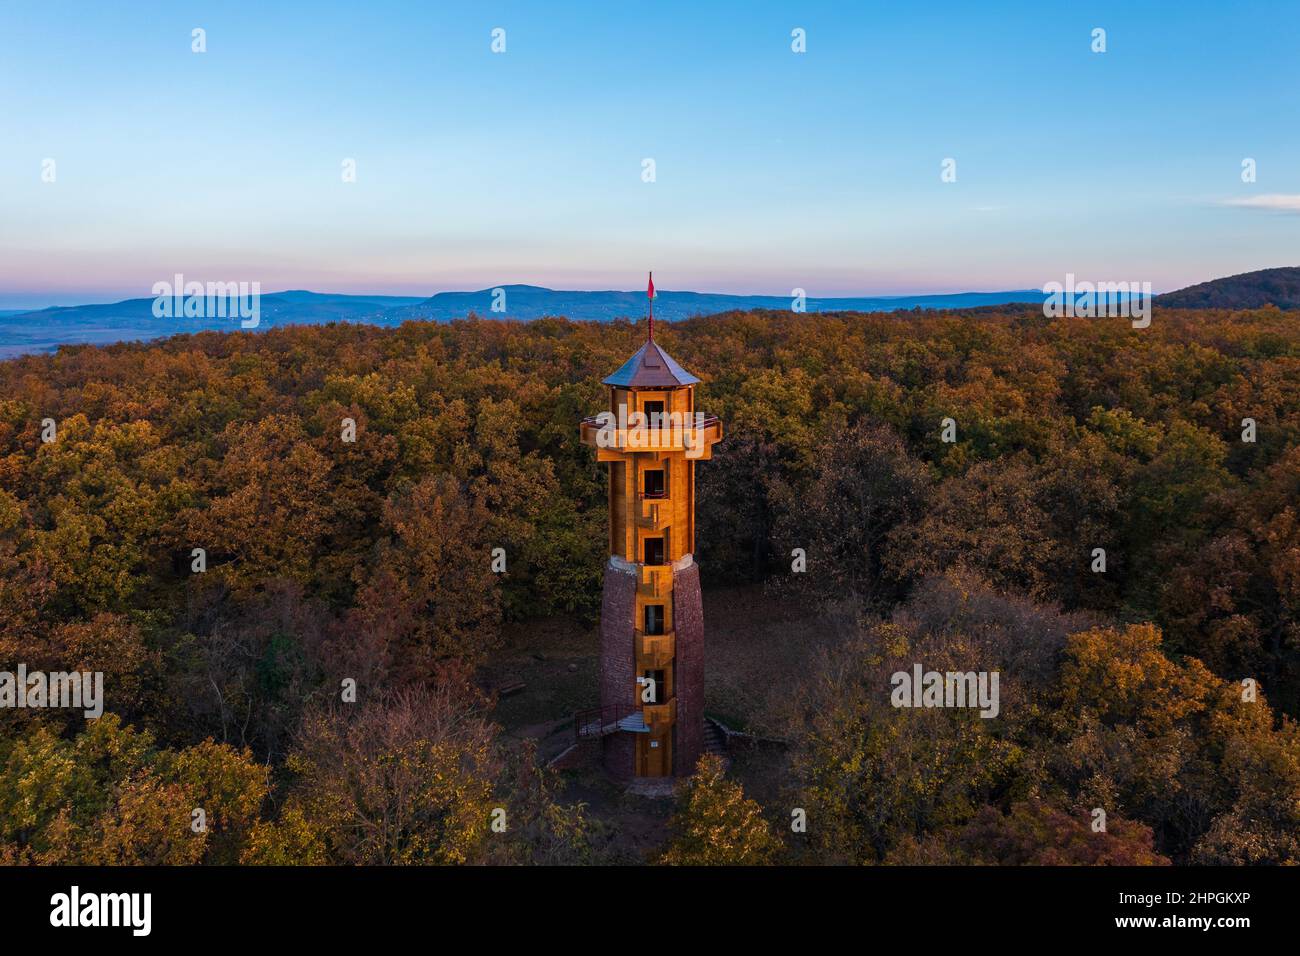 Aerial view about the freshly renovated lookout tower at Révfülöp. Cloudy autumn sunrise at the background. Hungarian name is Fülöp-hegyi kilátó. Stock Photo